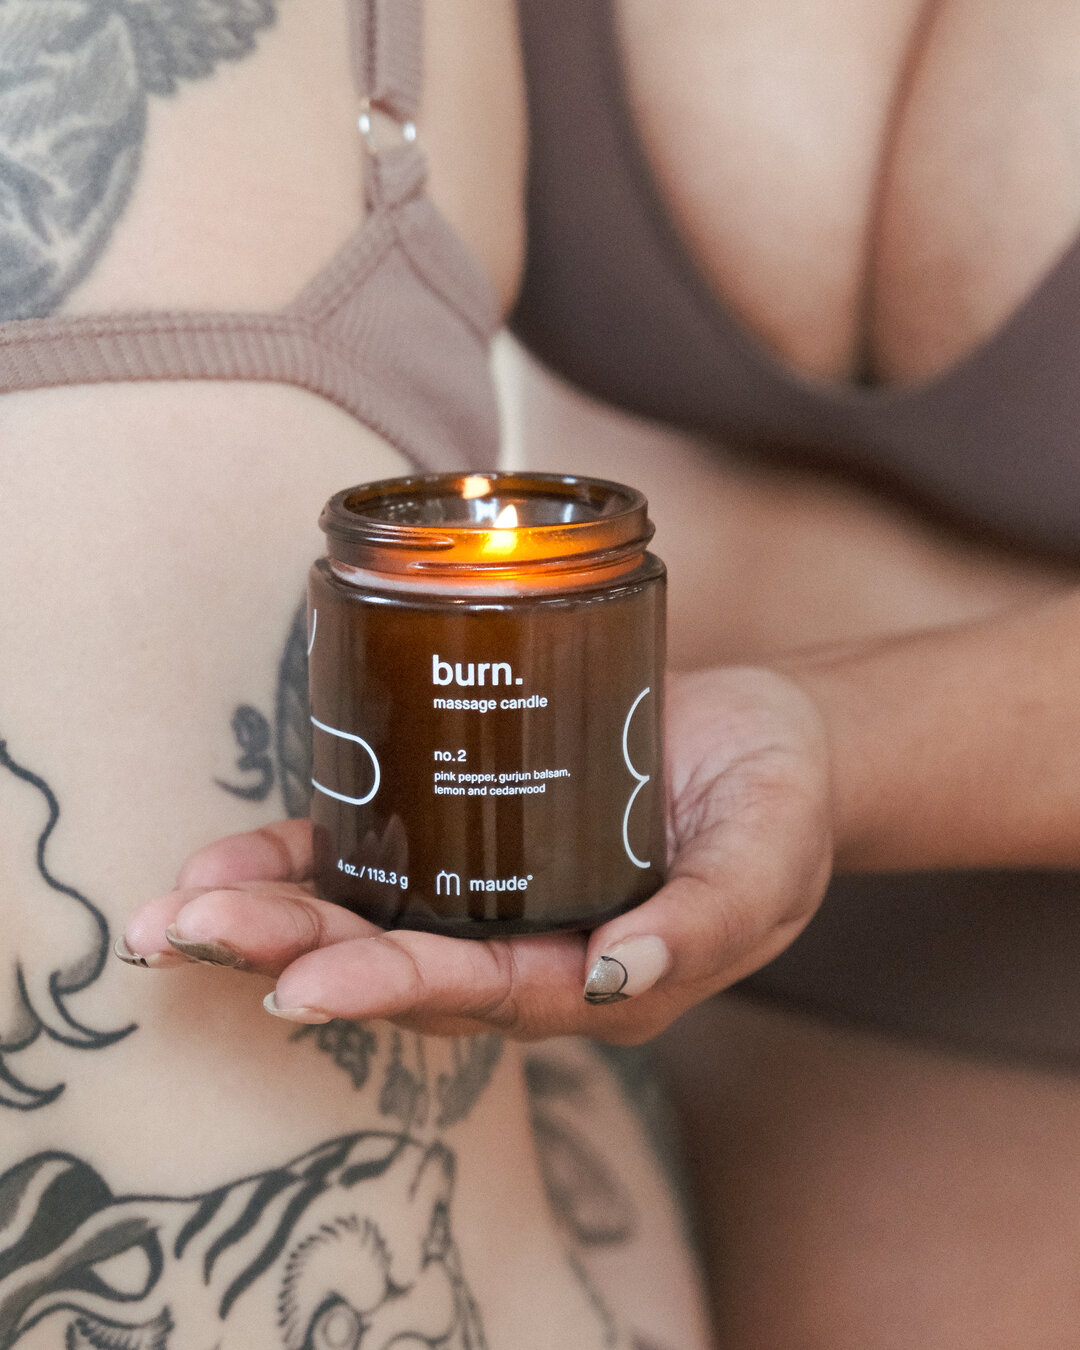 Light our Burn candle for 10&ndash;15 minutes to allow enough oil to form (and it&rsquo;ll help set the mood;) ⠀⠀⠀⠀⠀⠀⠀⠀⠀
⠀⠀⠀⠀⠀⠀⠀⠀⠀
Once you blow out the candle, the melted oil is ready to use. Because it&rsquo;s oil-based, the candle has a lower burn